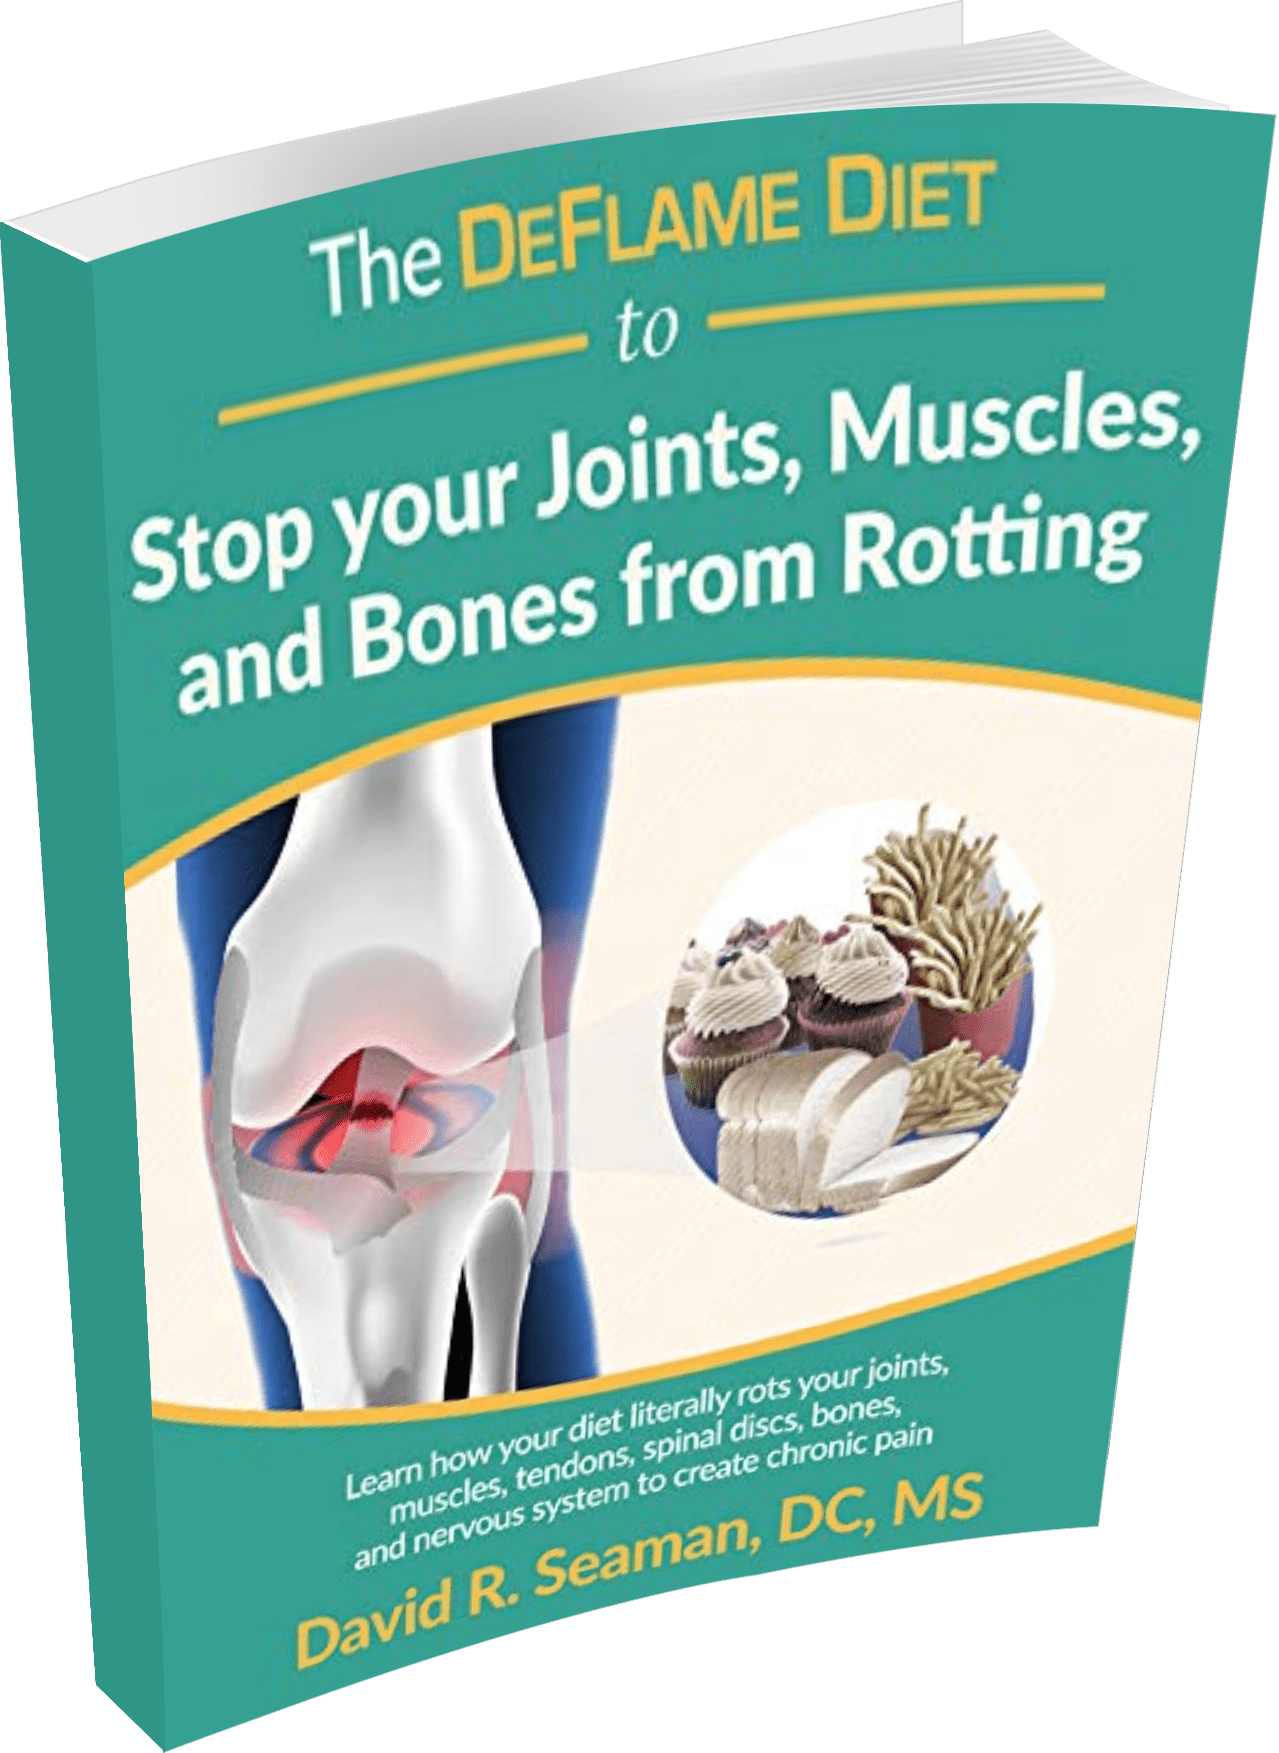 The DeFlame Diet to Stop your Joints, Muscles, and Bones from Rotting